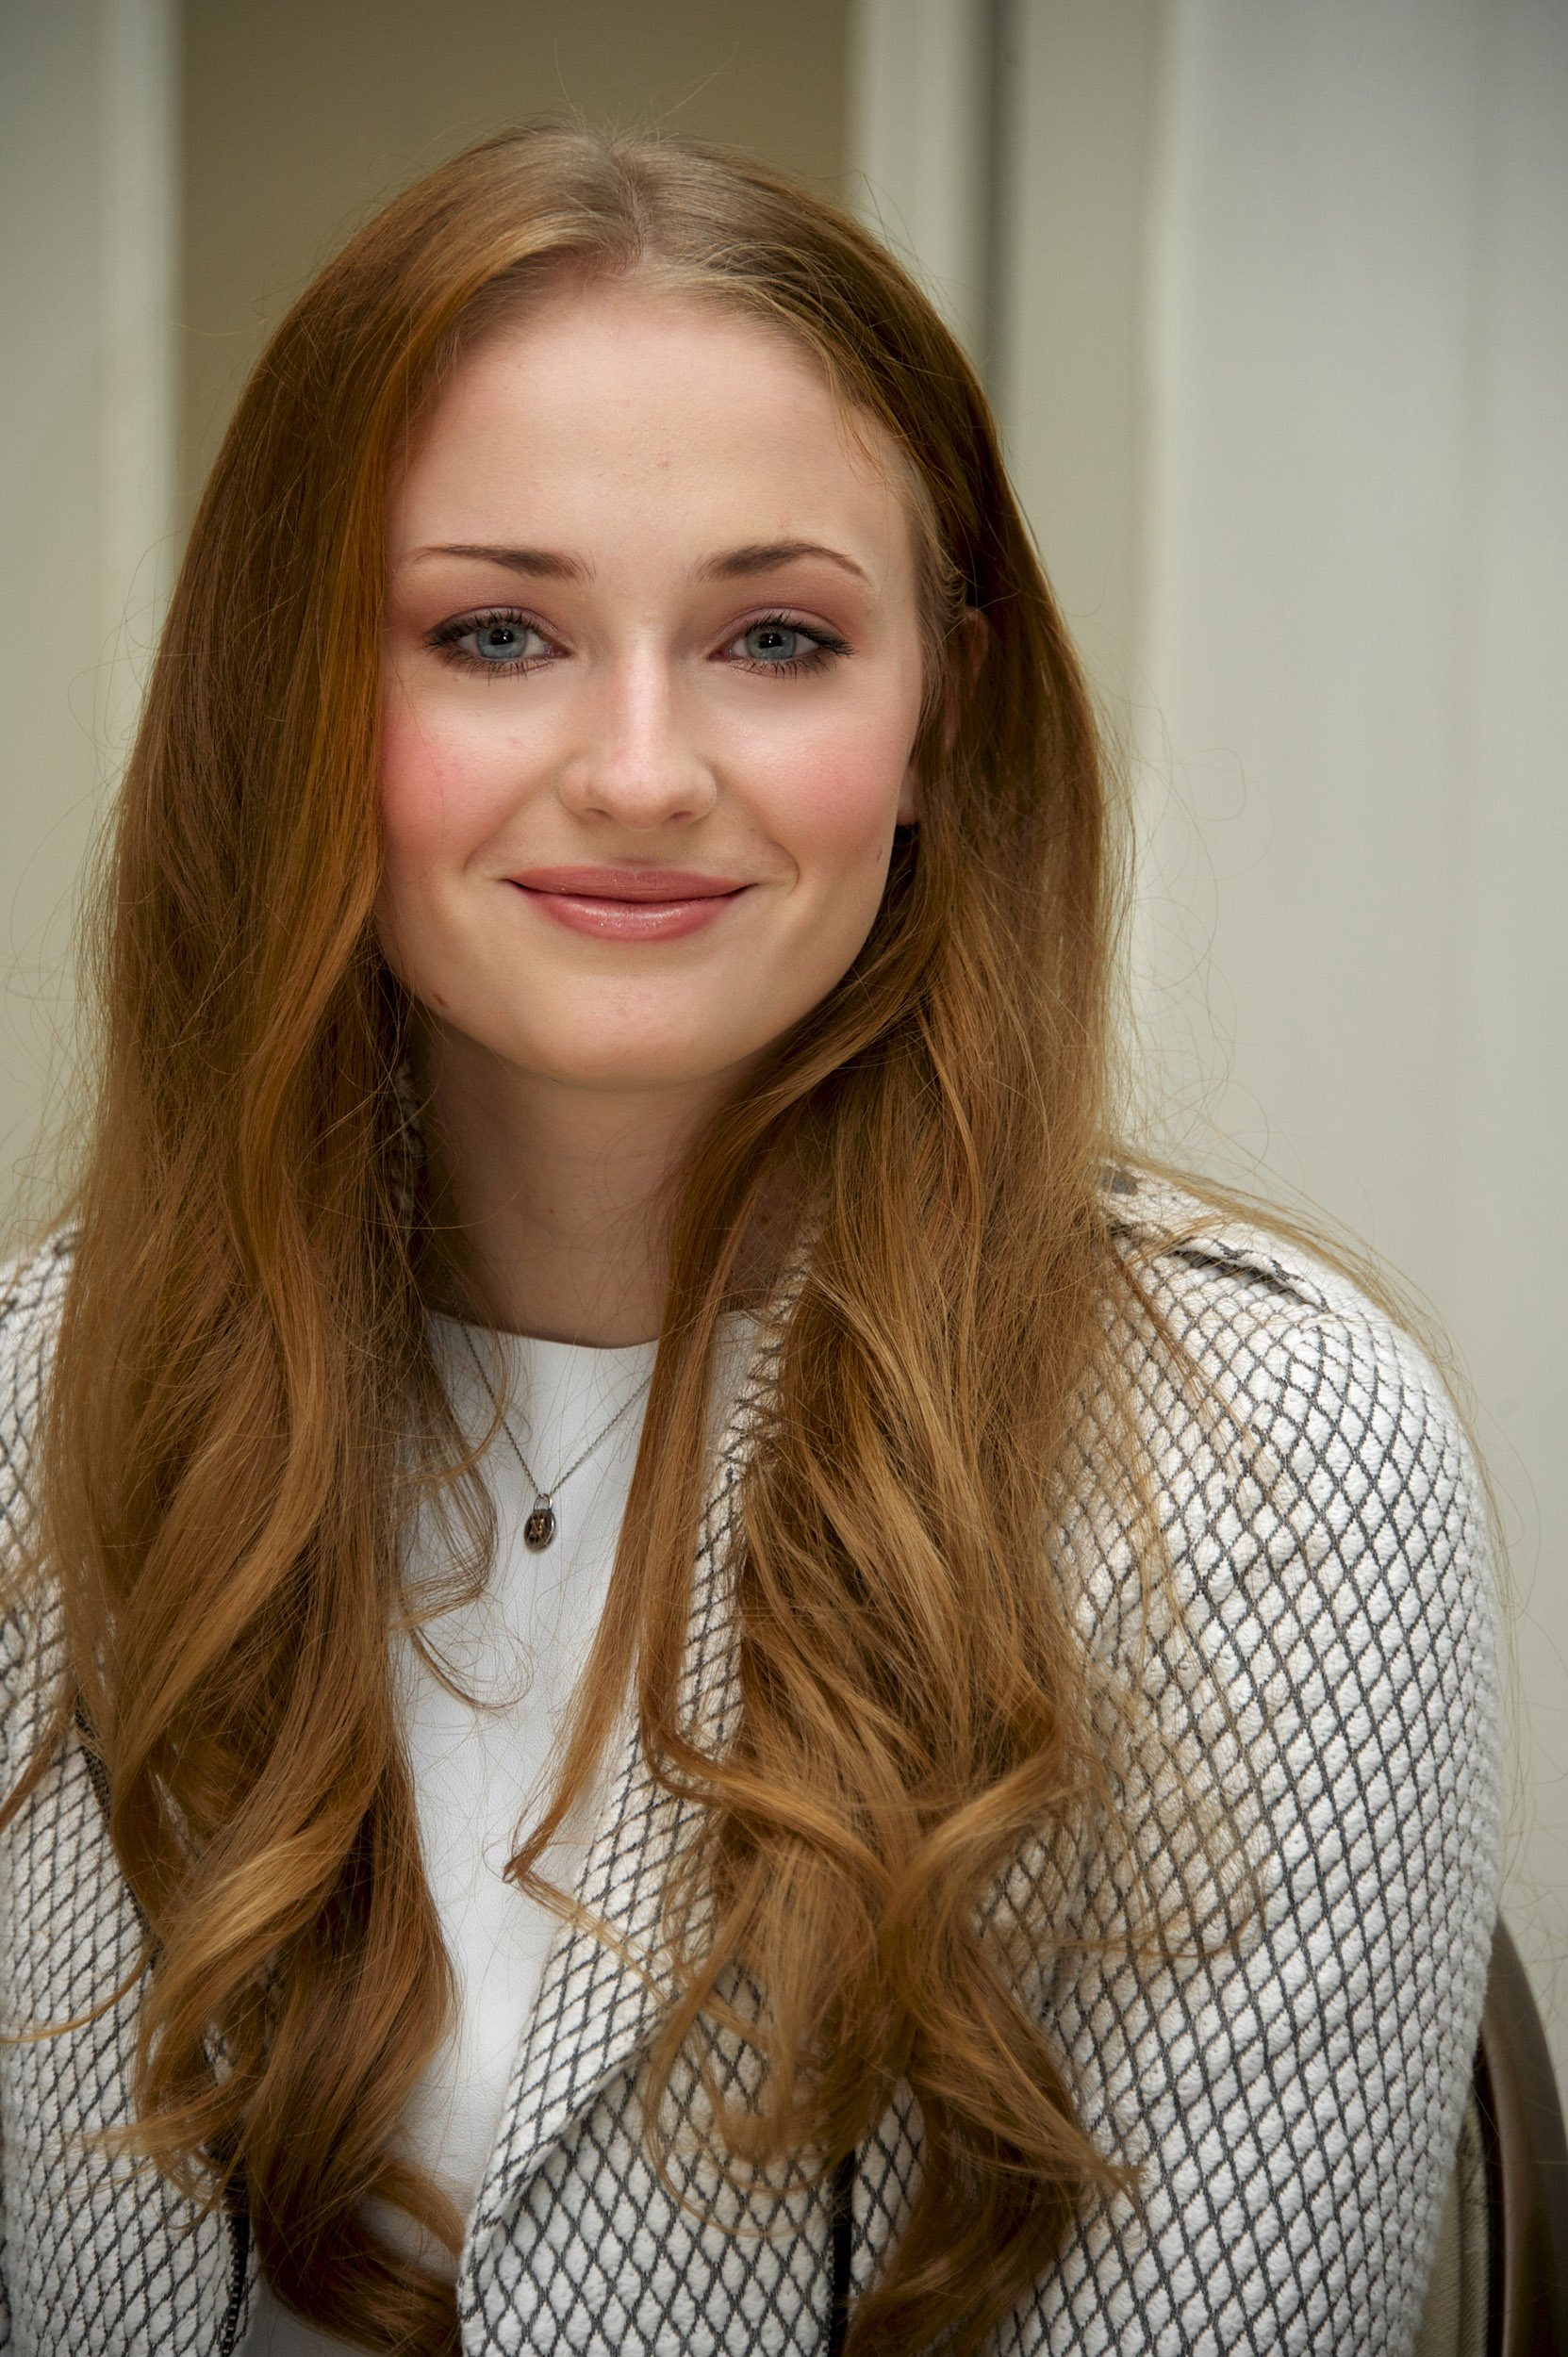 Sophie Turner (actress) photo 405 of 967 pics, wallpaper - photo #752163 - ThePlace2